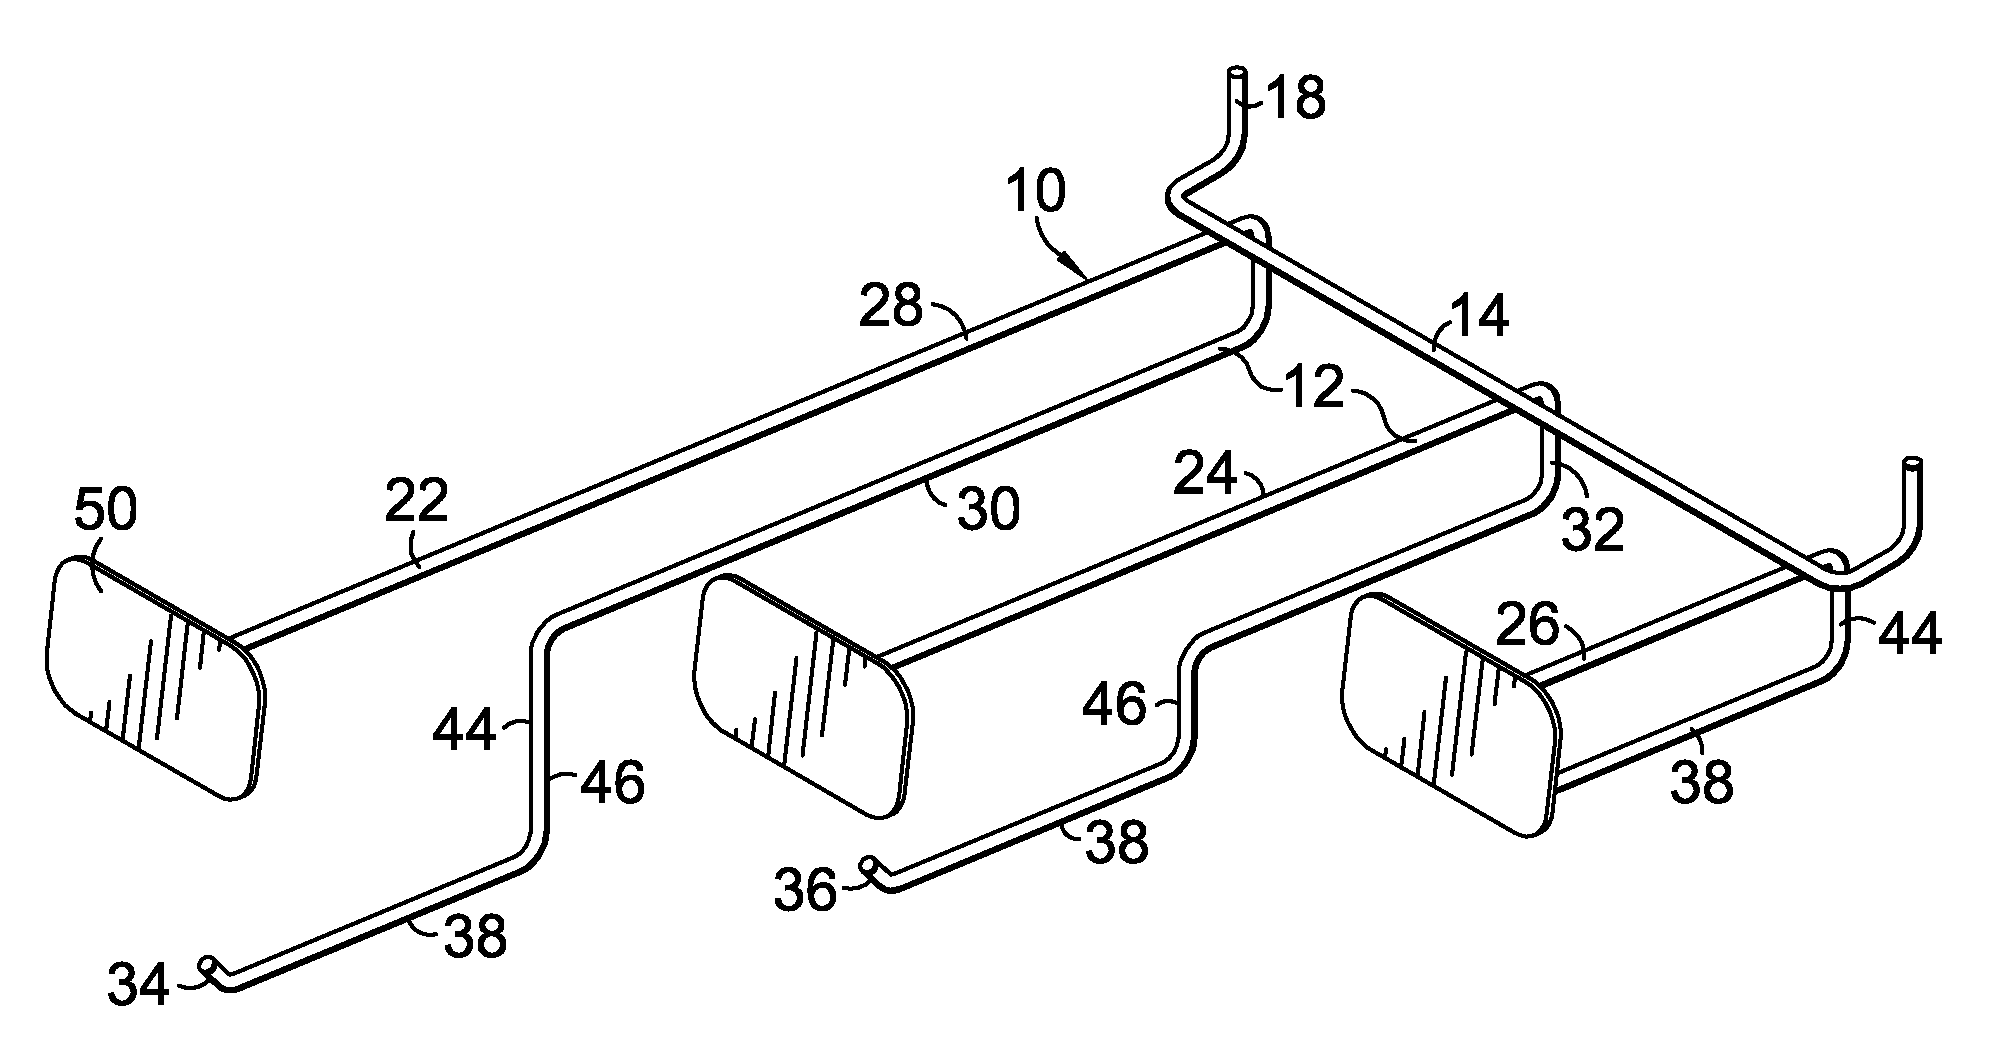 Multi-Level Product Display Device